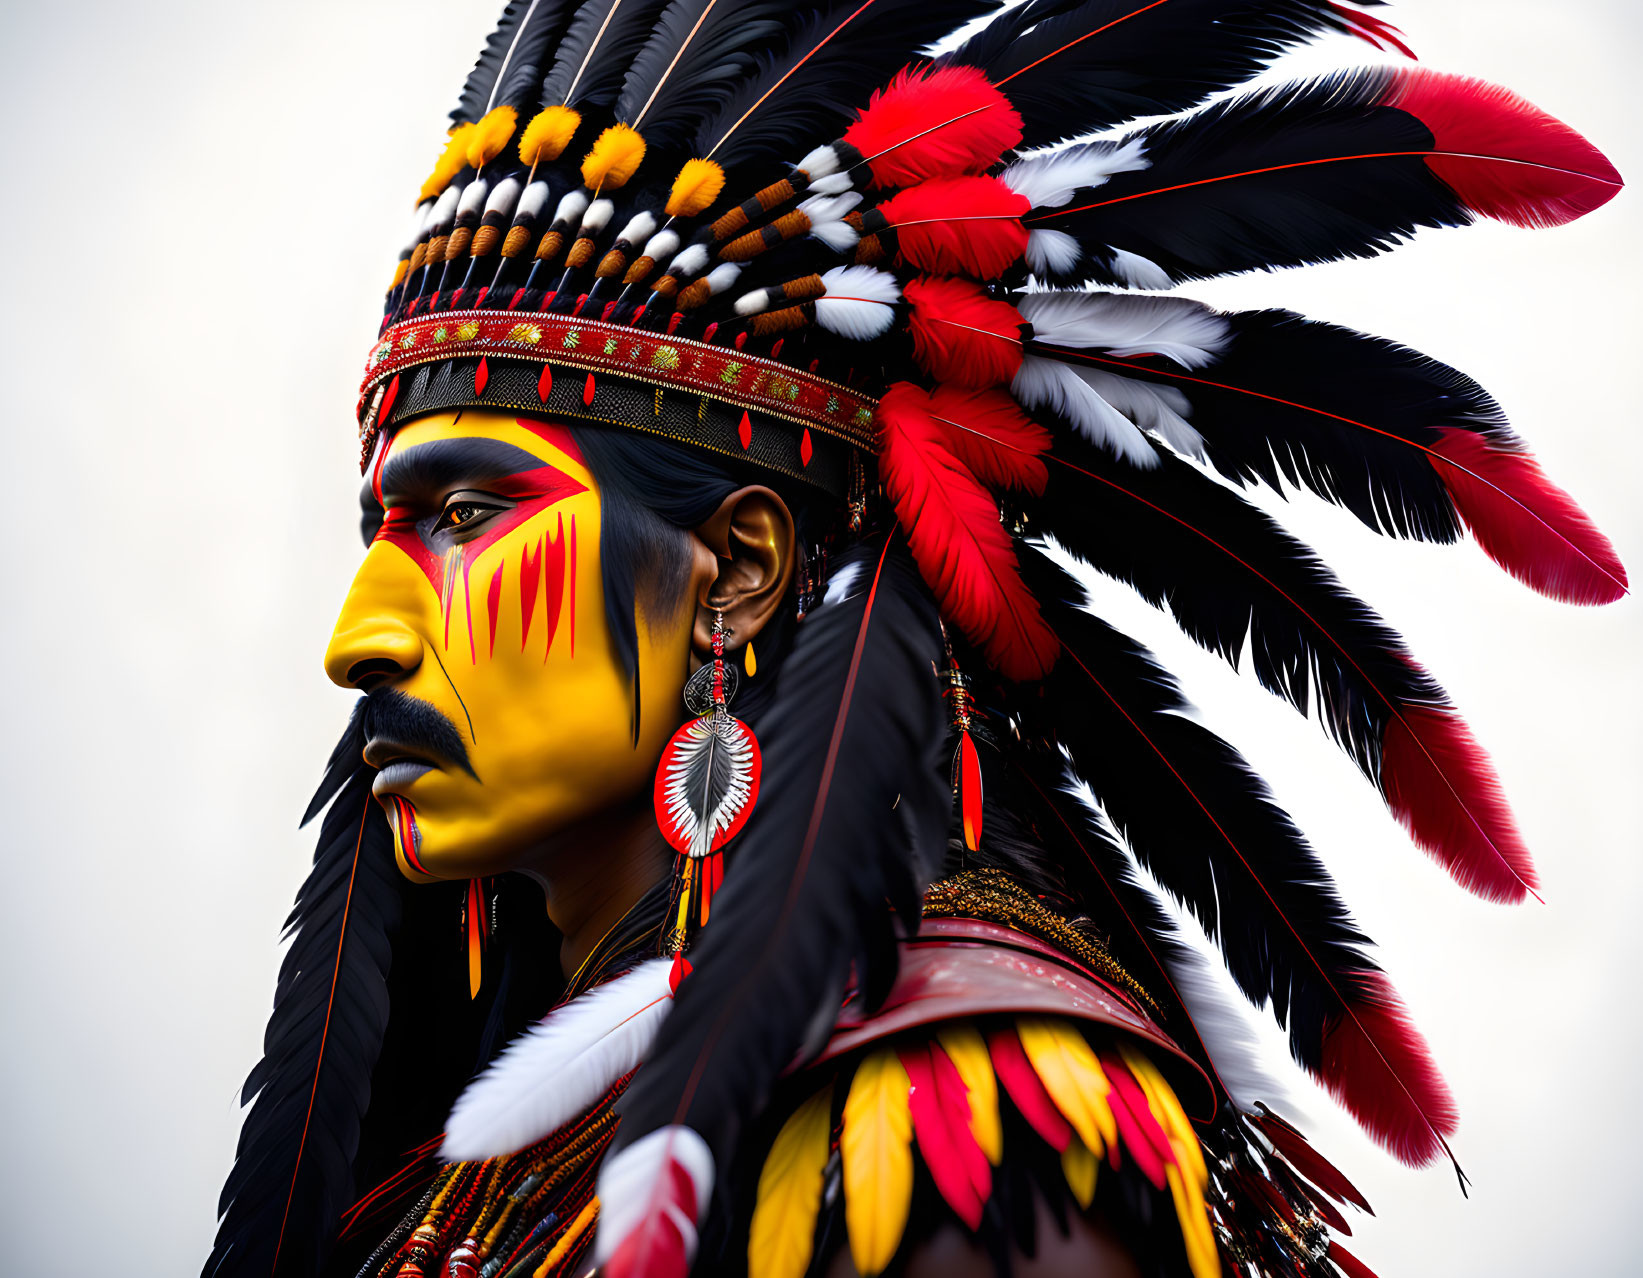 Elaborate Native American headdress with vibrant feathers and traditional regalia